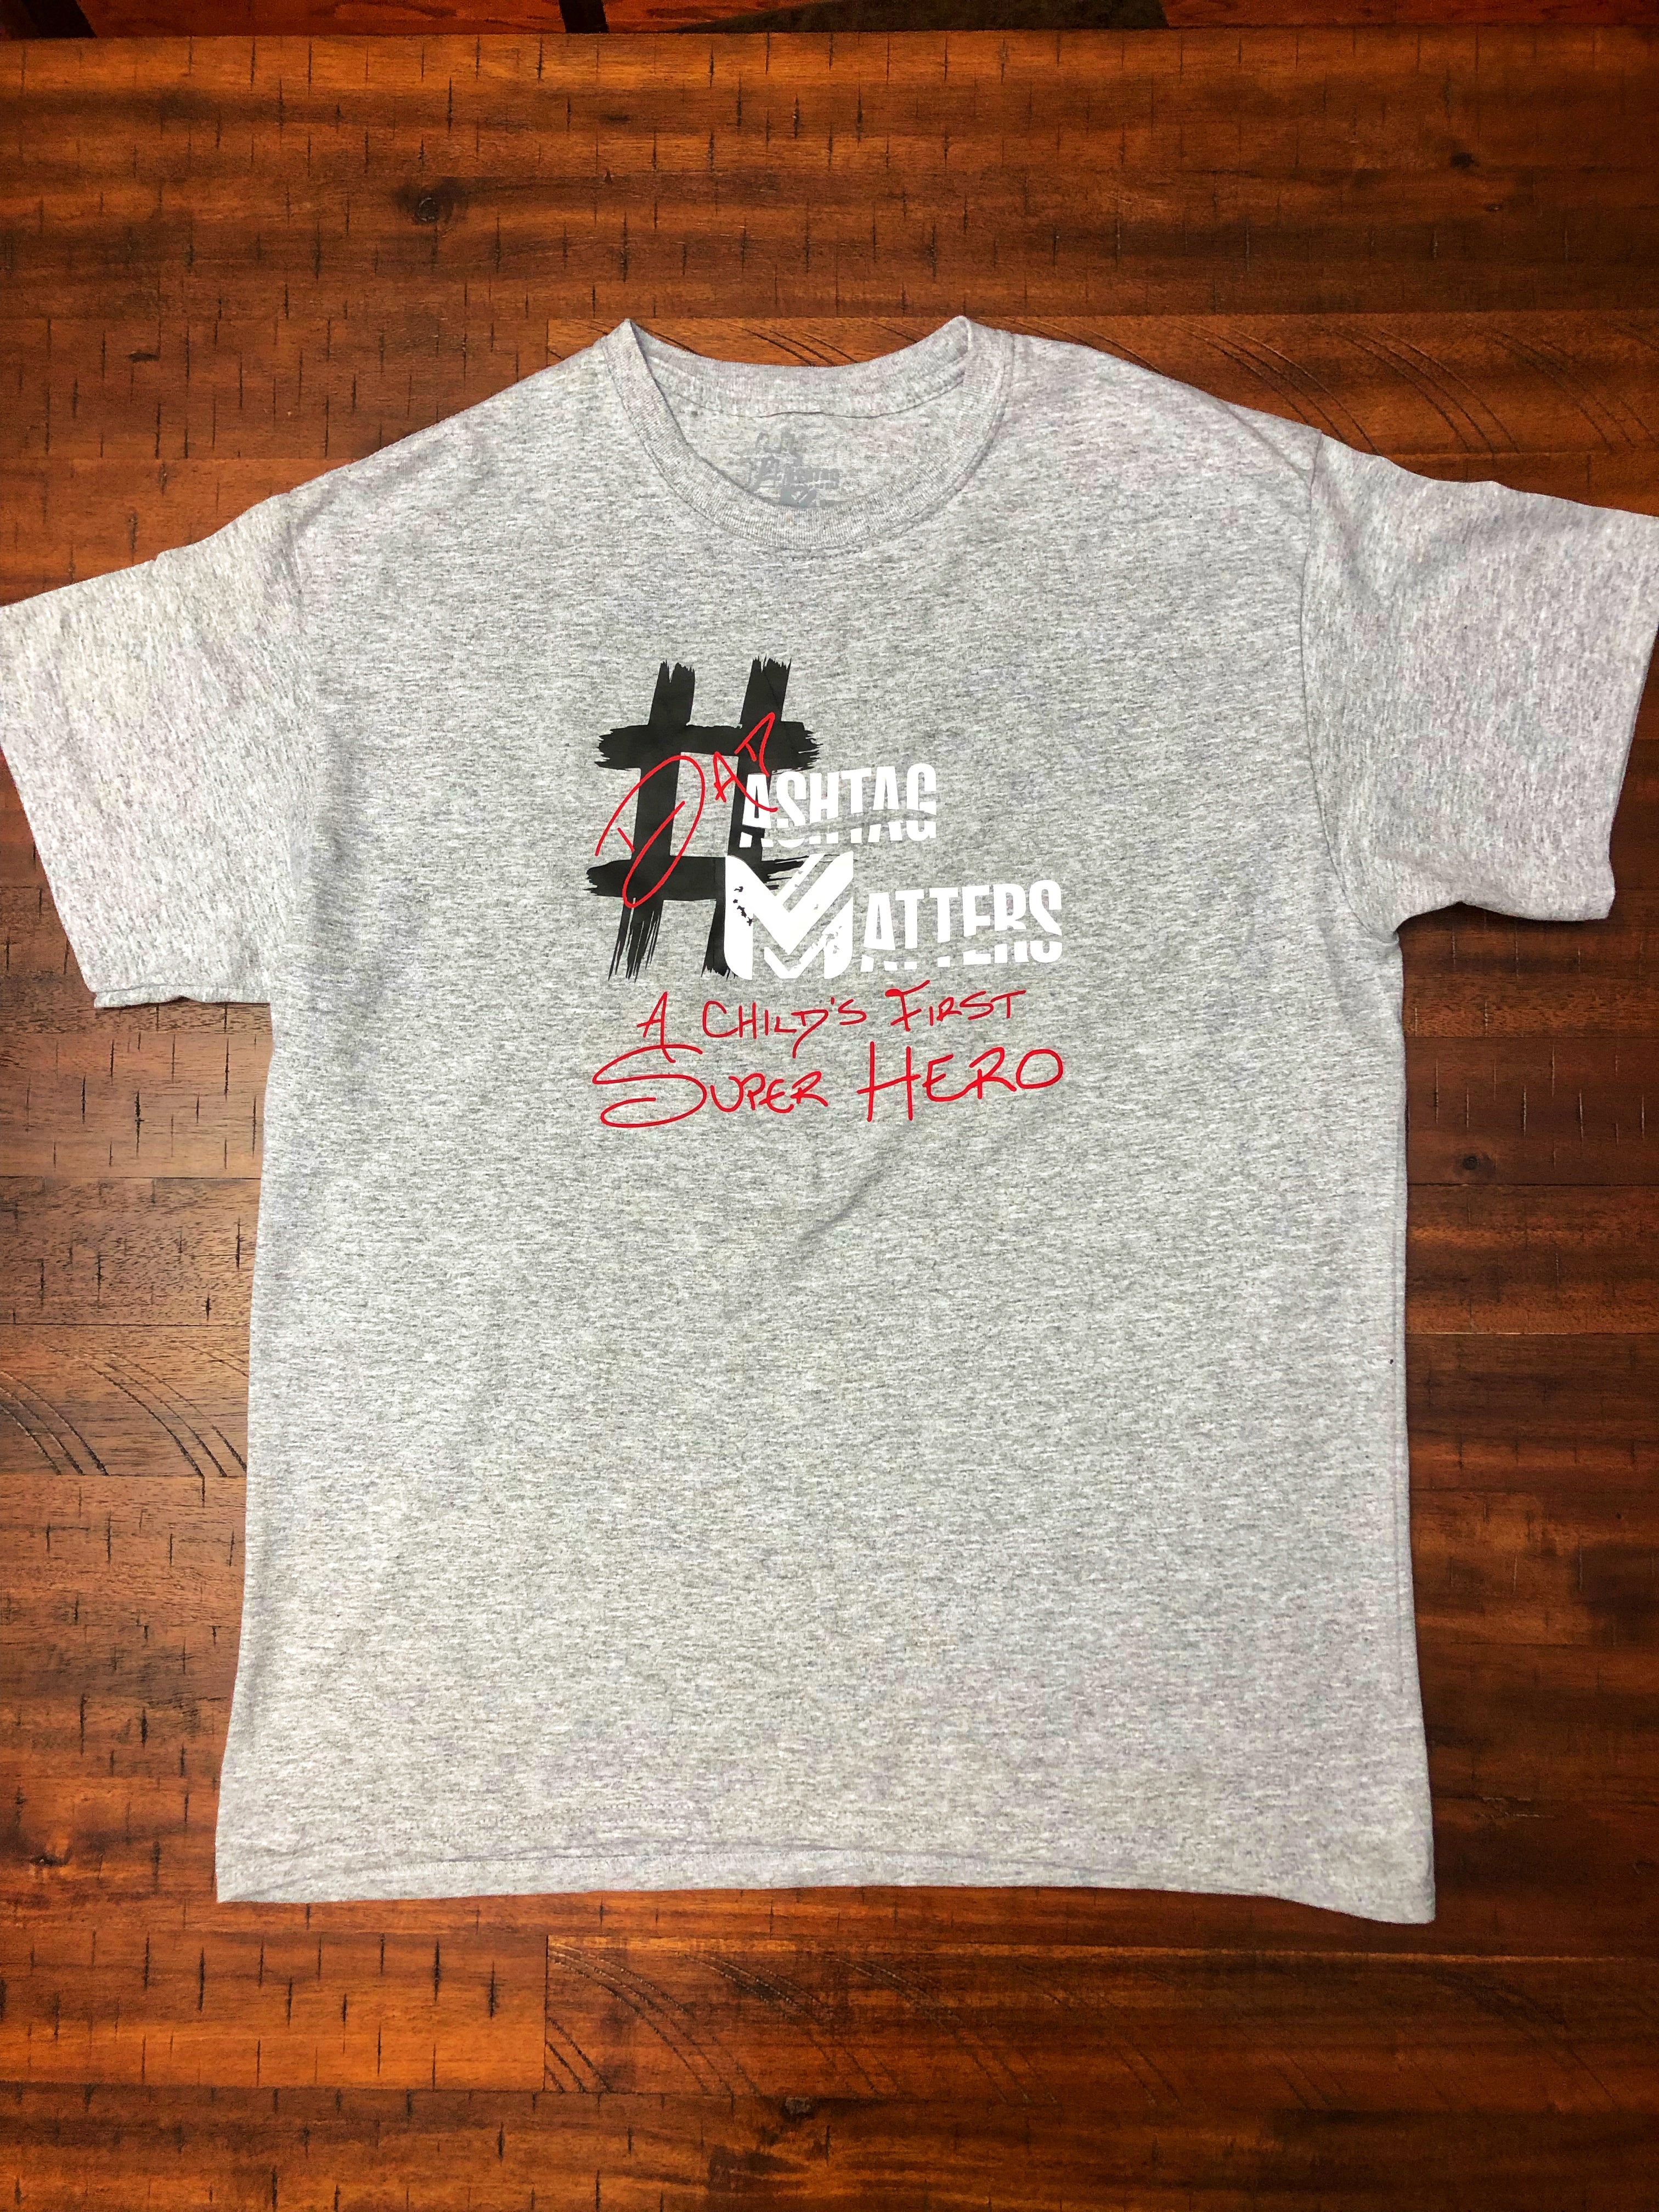 Hashtag Matters (Dad / A Child’s First Super Hero) T-shirt